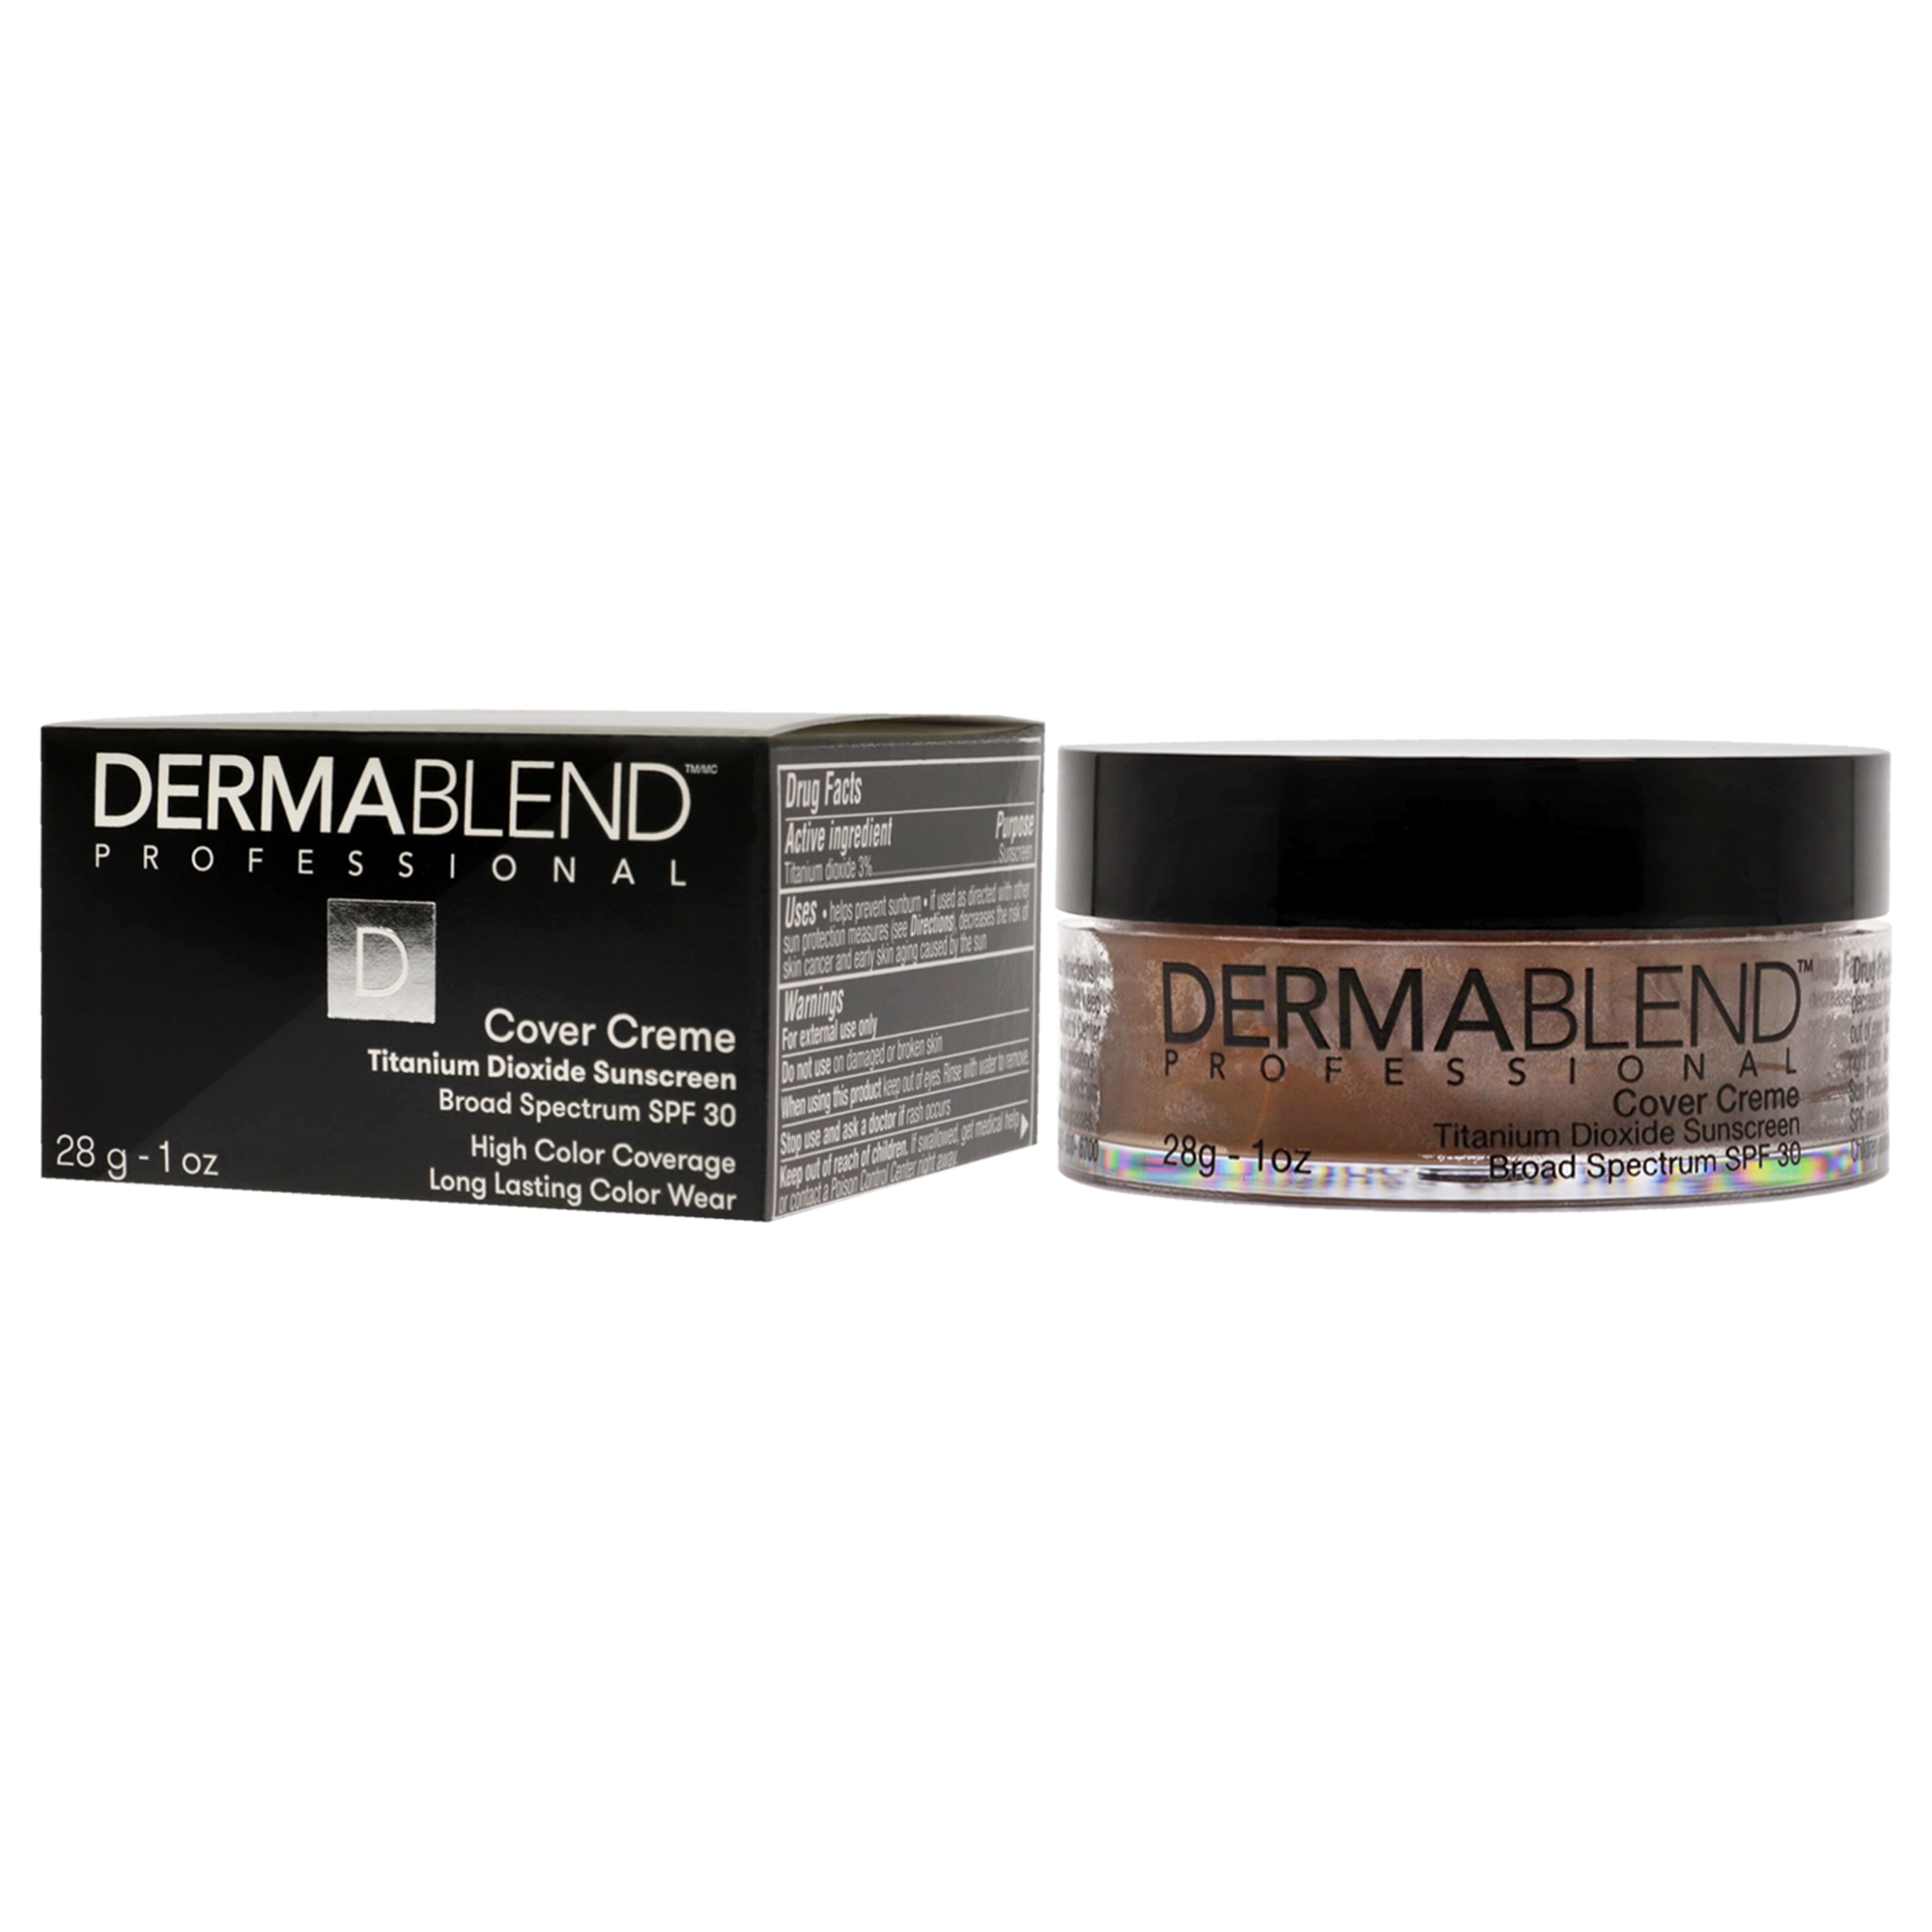 Dermablend Cover Creme High Color Coverage SPF 30 - 90N Deep Brown , 1 oz Foundation - image 4 of 6